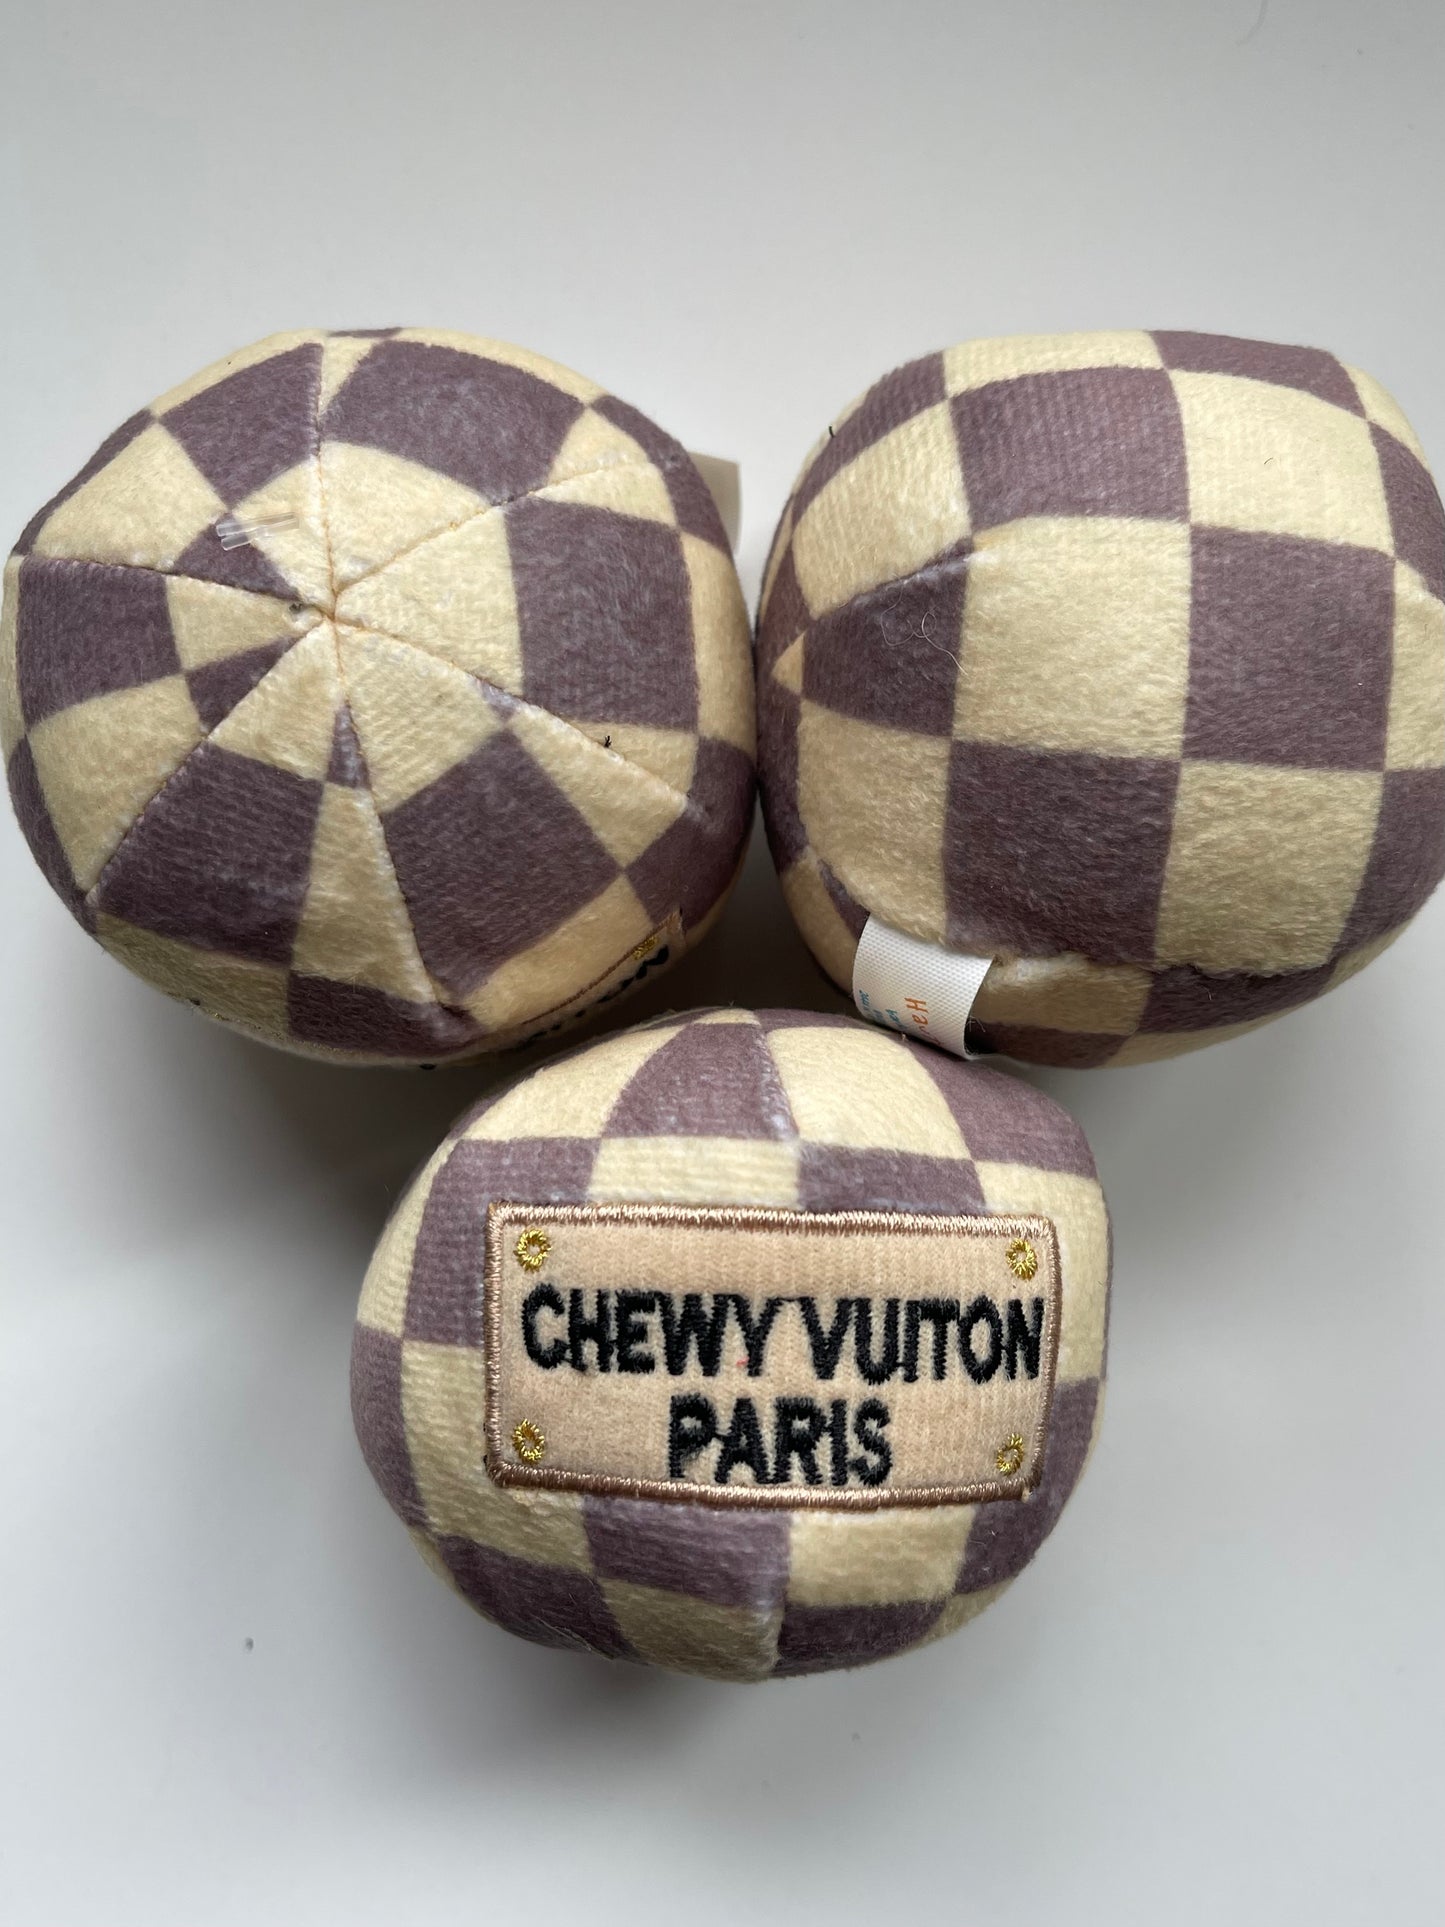 Chewy Vuiton Paris small or large ball